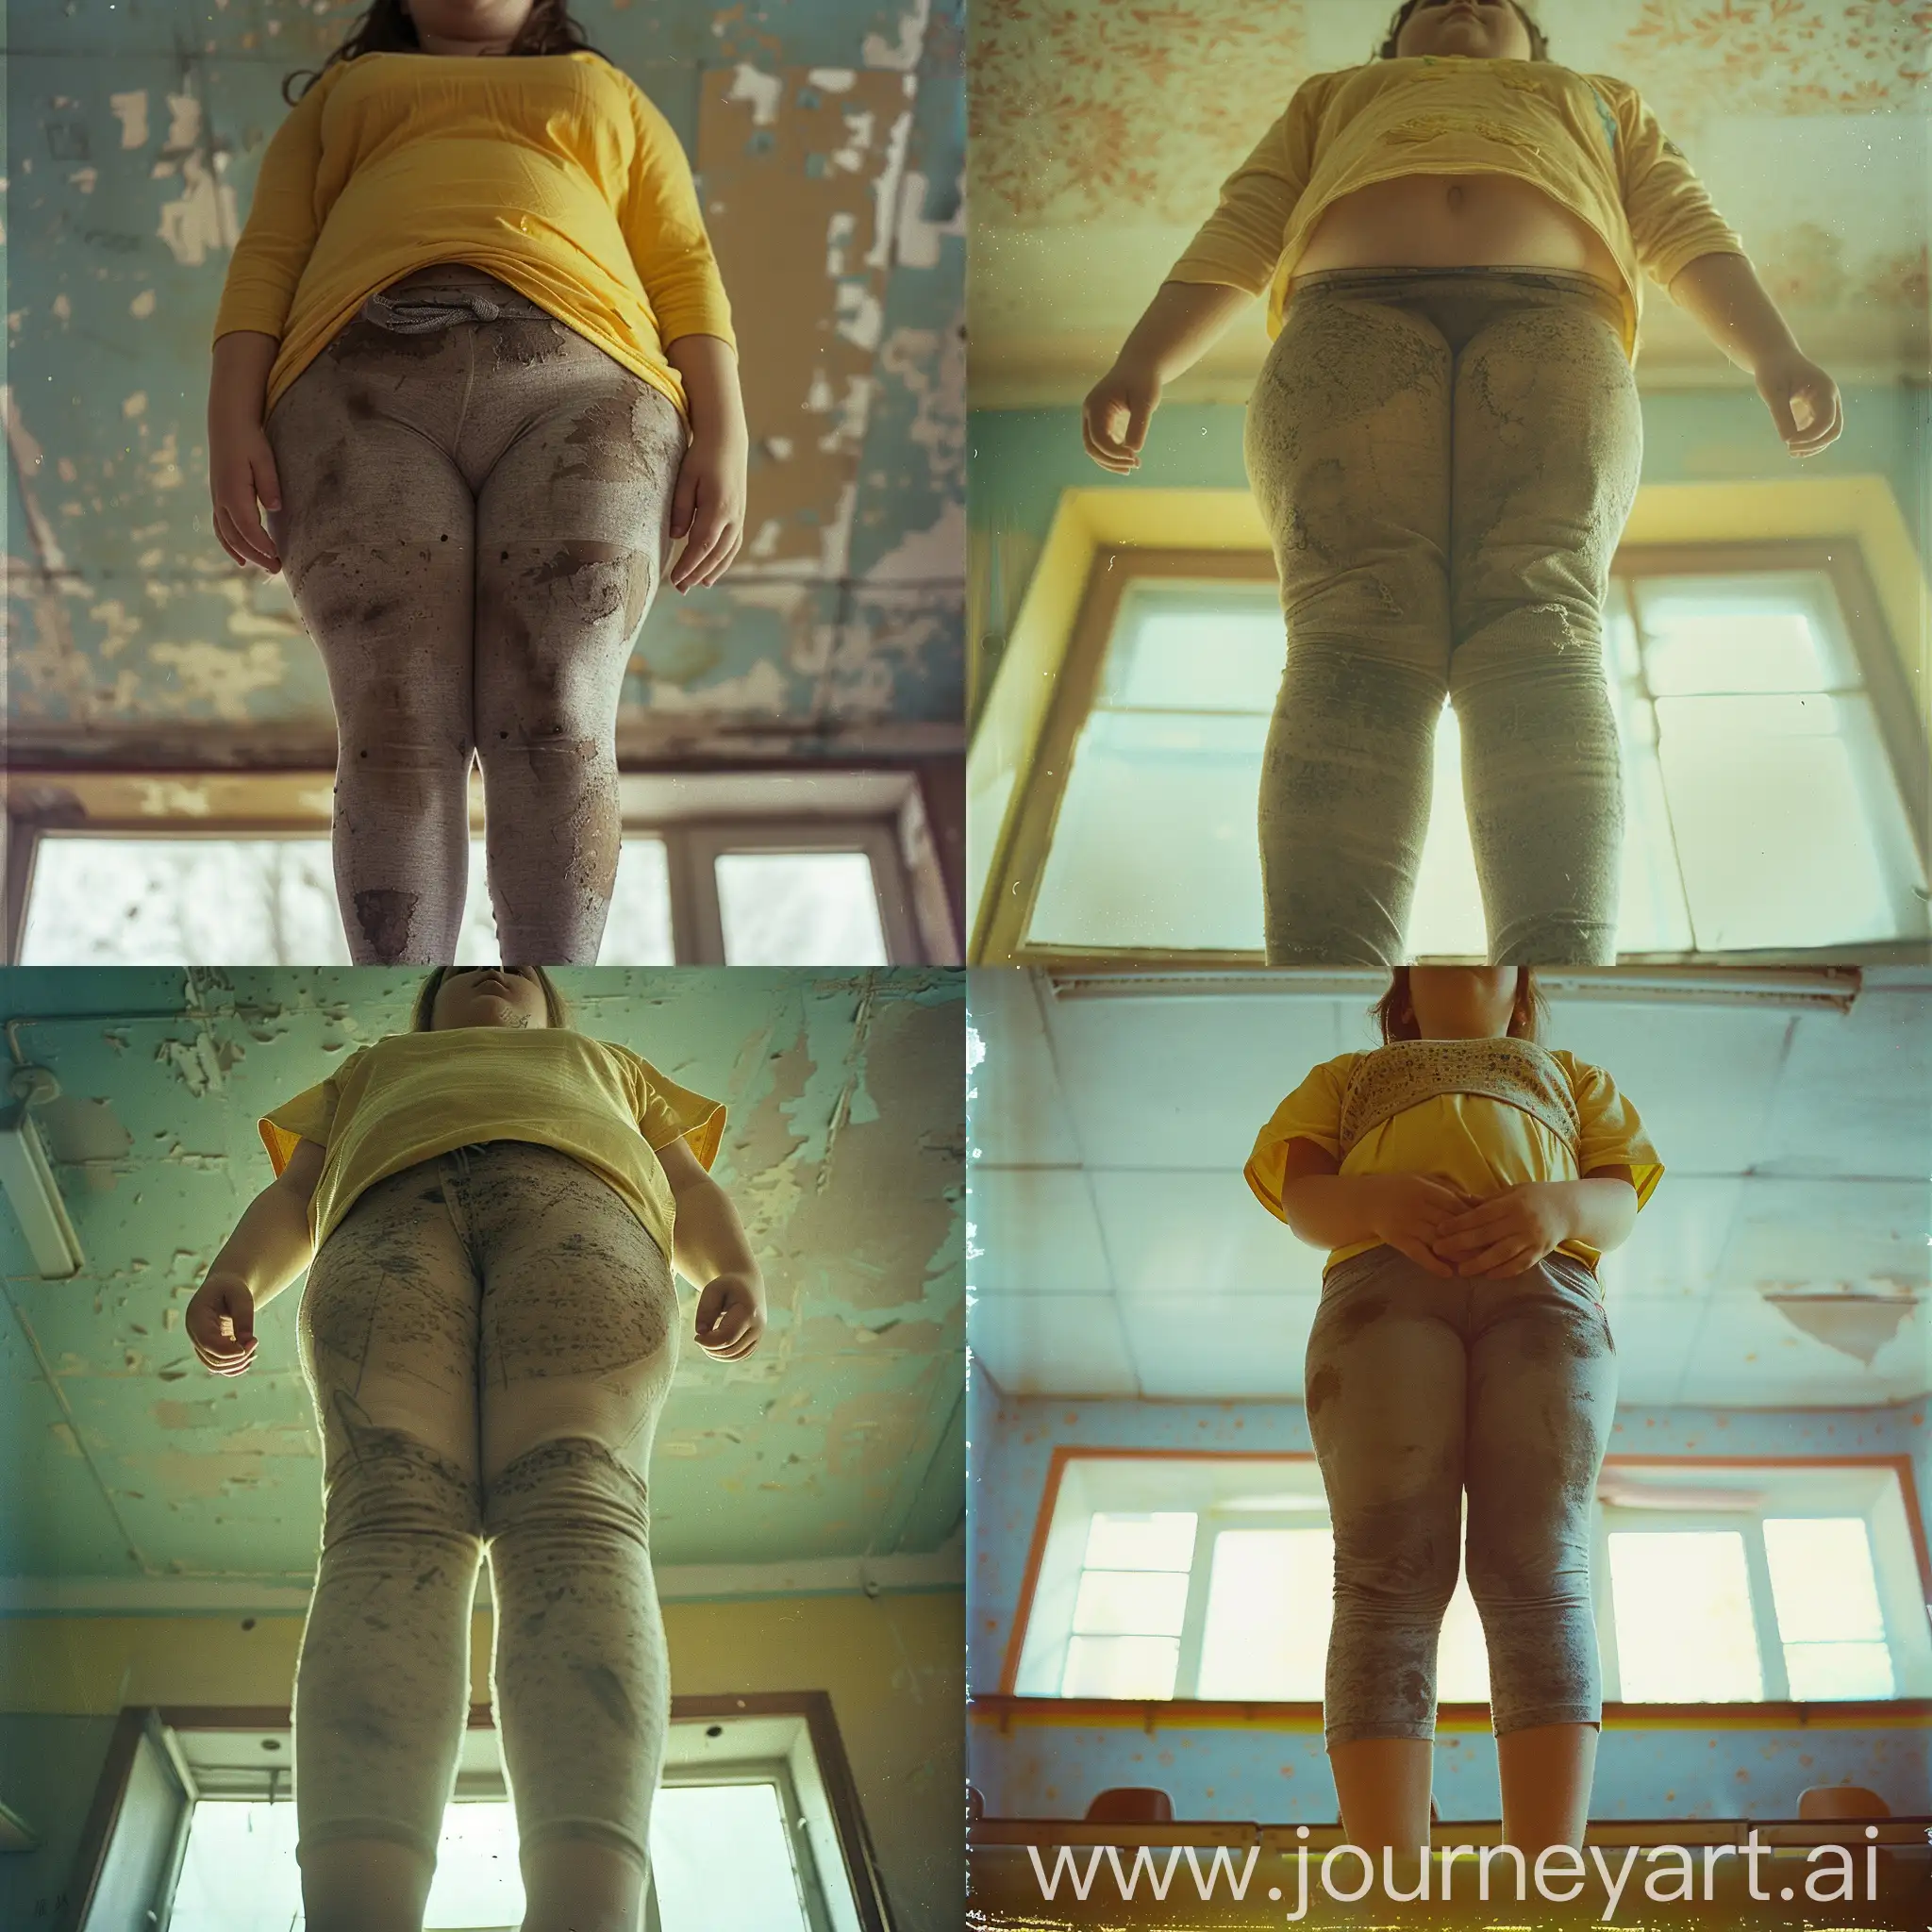 photo from russian 2015s, grainy effect, bottom up view, soviet classroom landscape, close up shot 14 yo rural chubby fat girl standing above viewer (wearing a yellow shirt, grey dirty leggings) photo on film, looking bottom up view